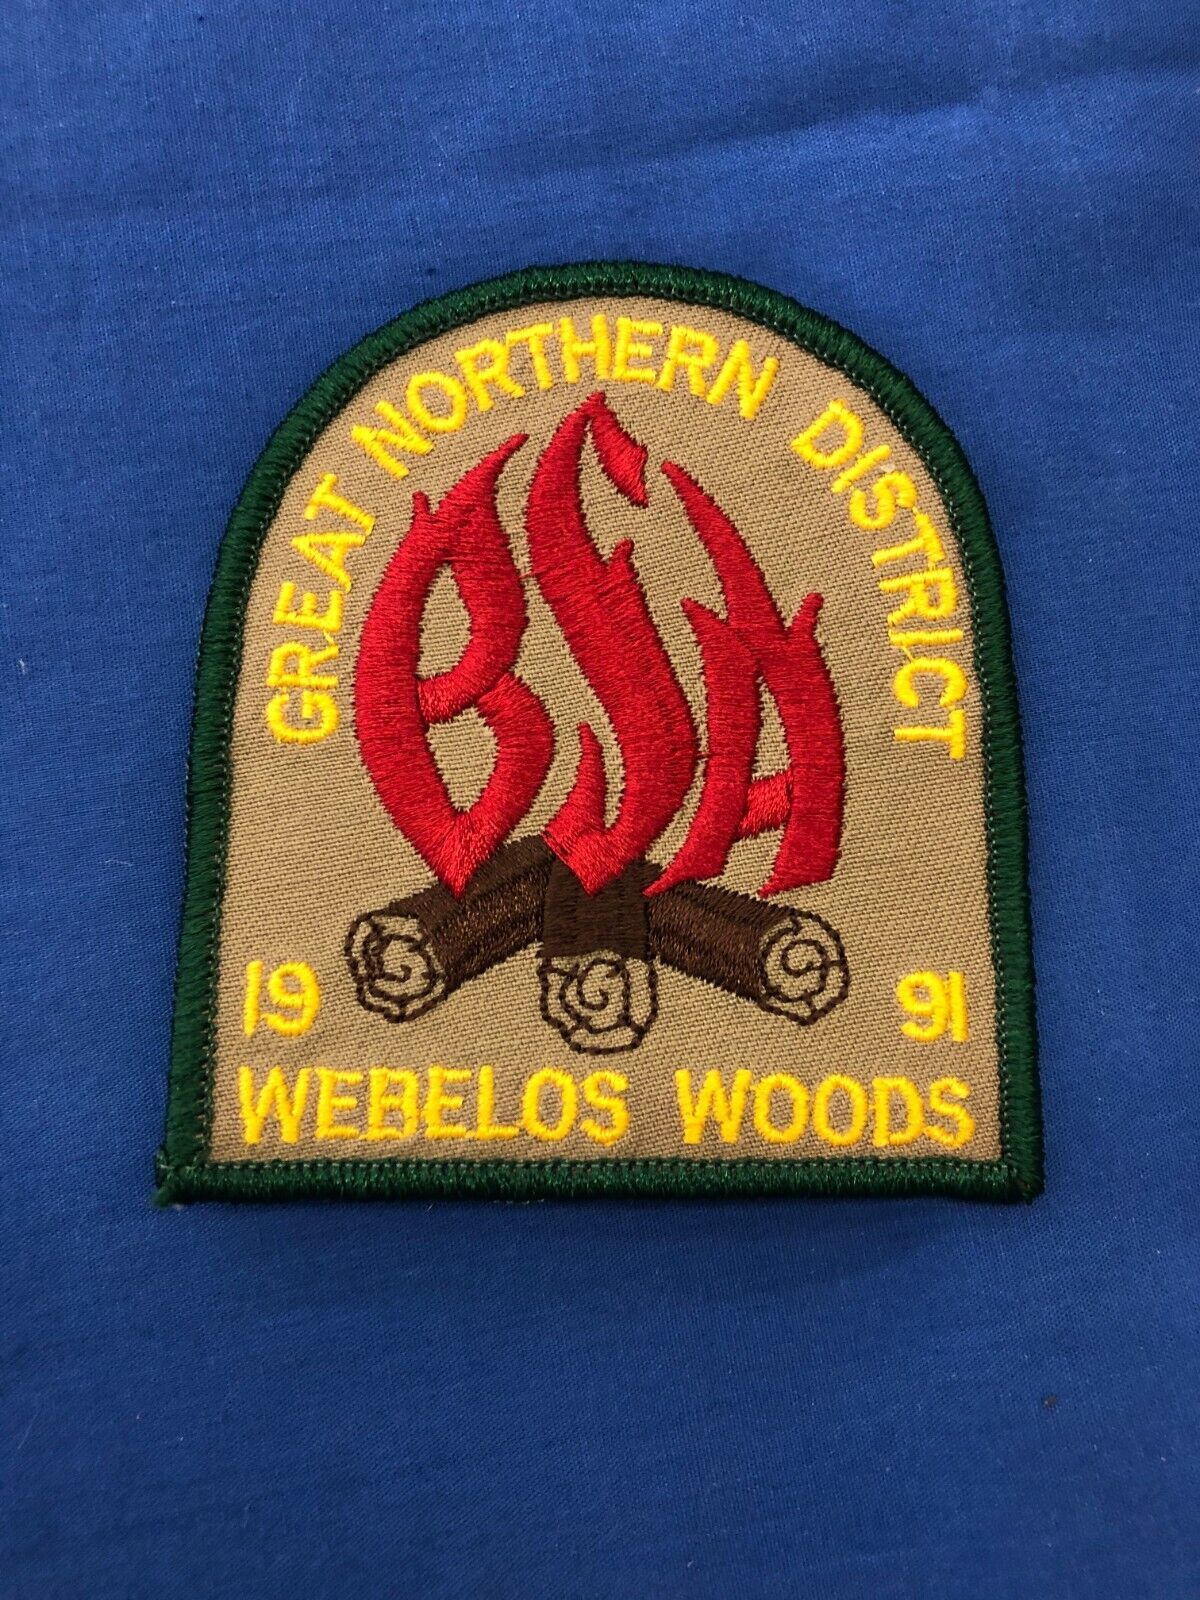 Great Northern District 1991 Werelos Woods Boy Scouts BSA Patch NOS